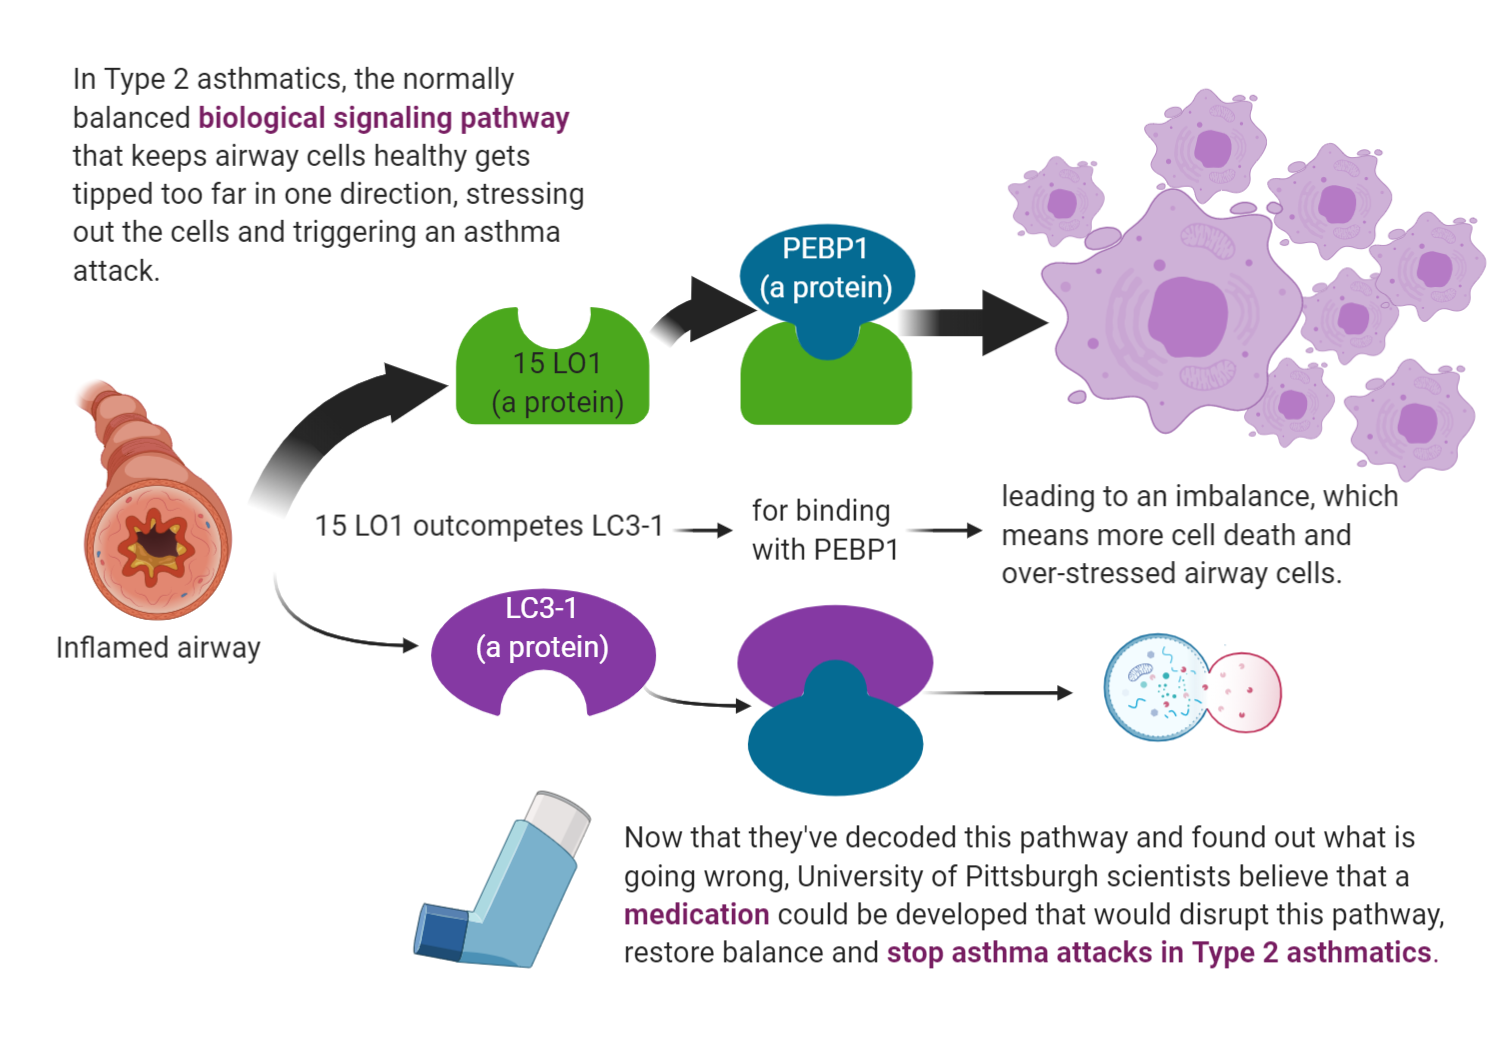 Diagram displaying the disrupted biological signaling pathway in Type 2 asthmatics that leads to asthma attacks.